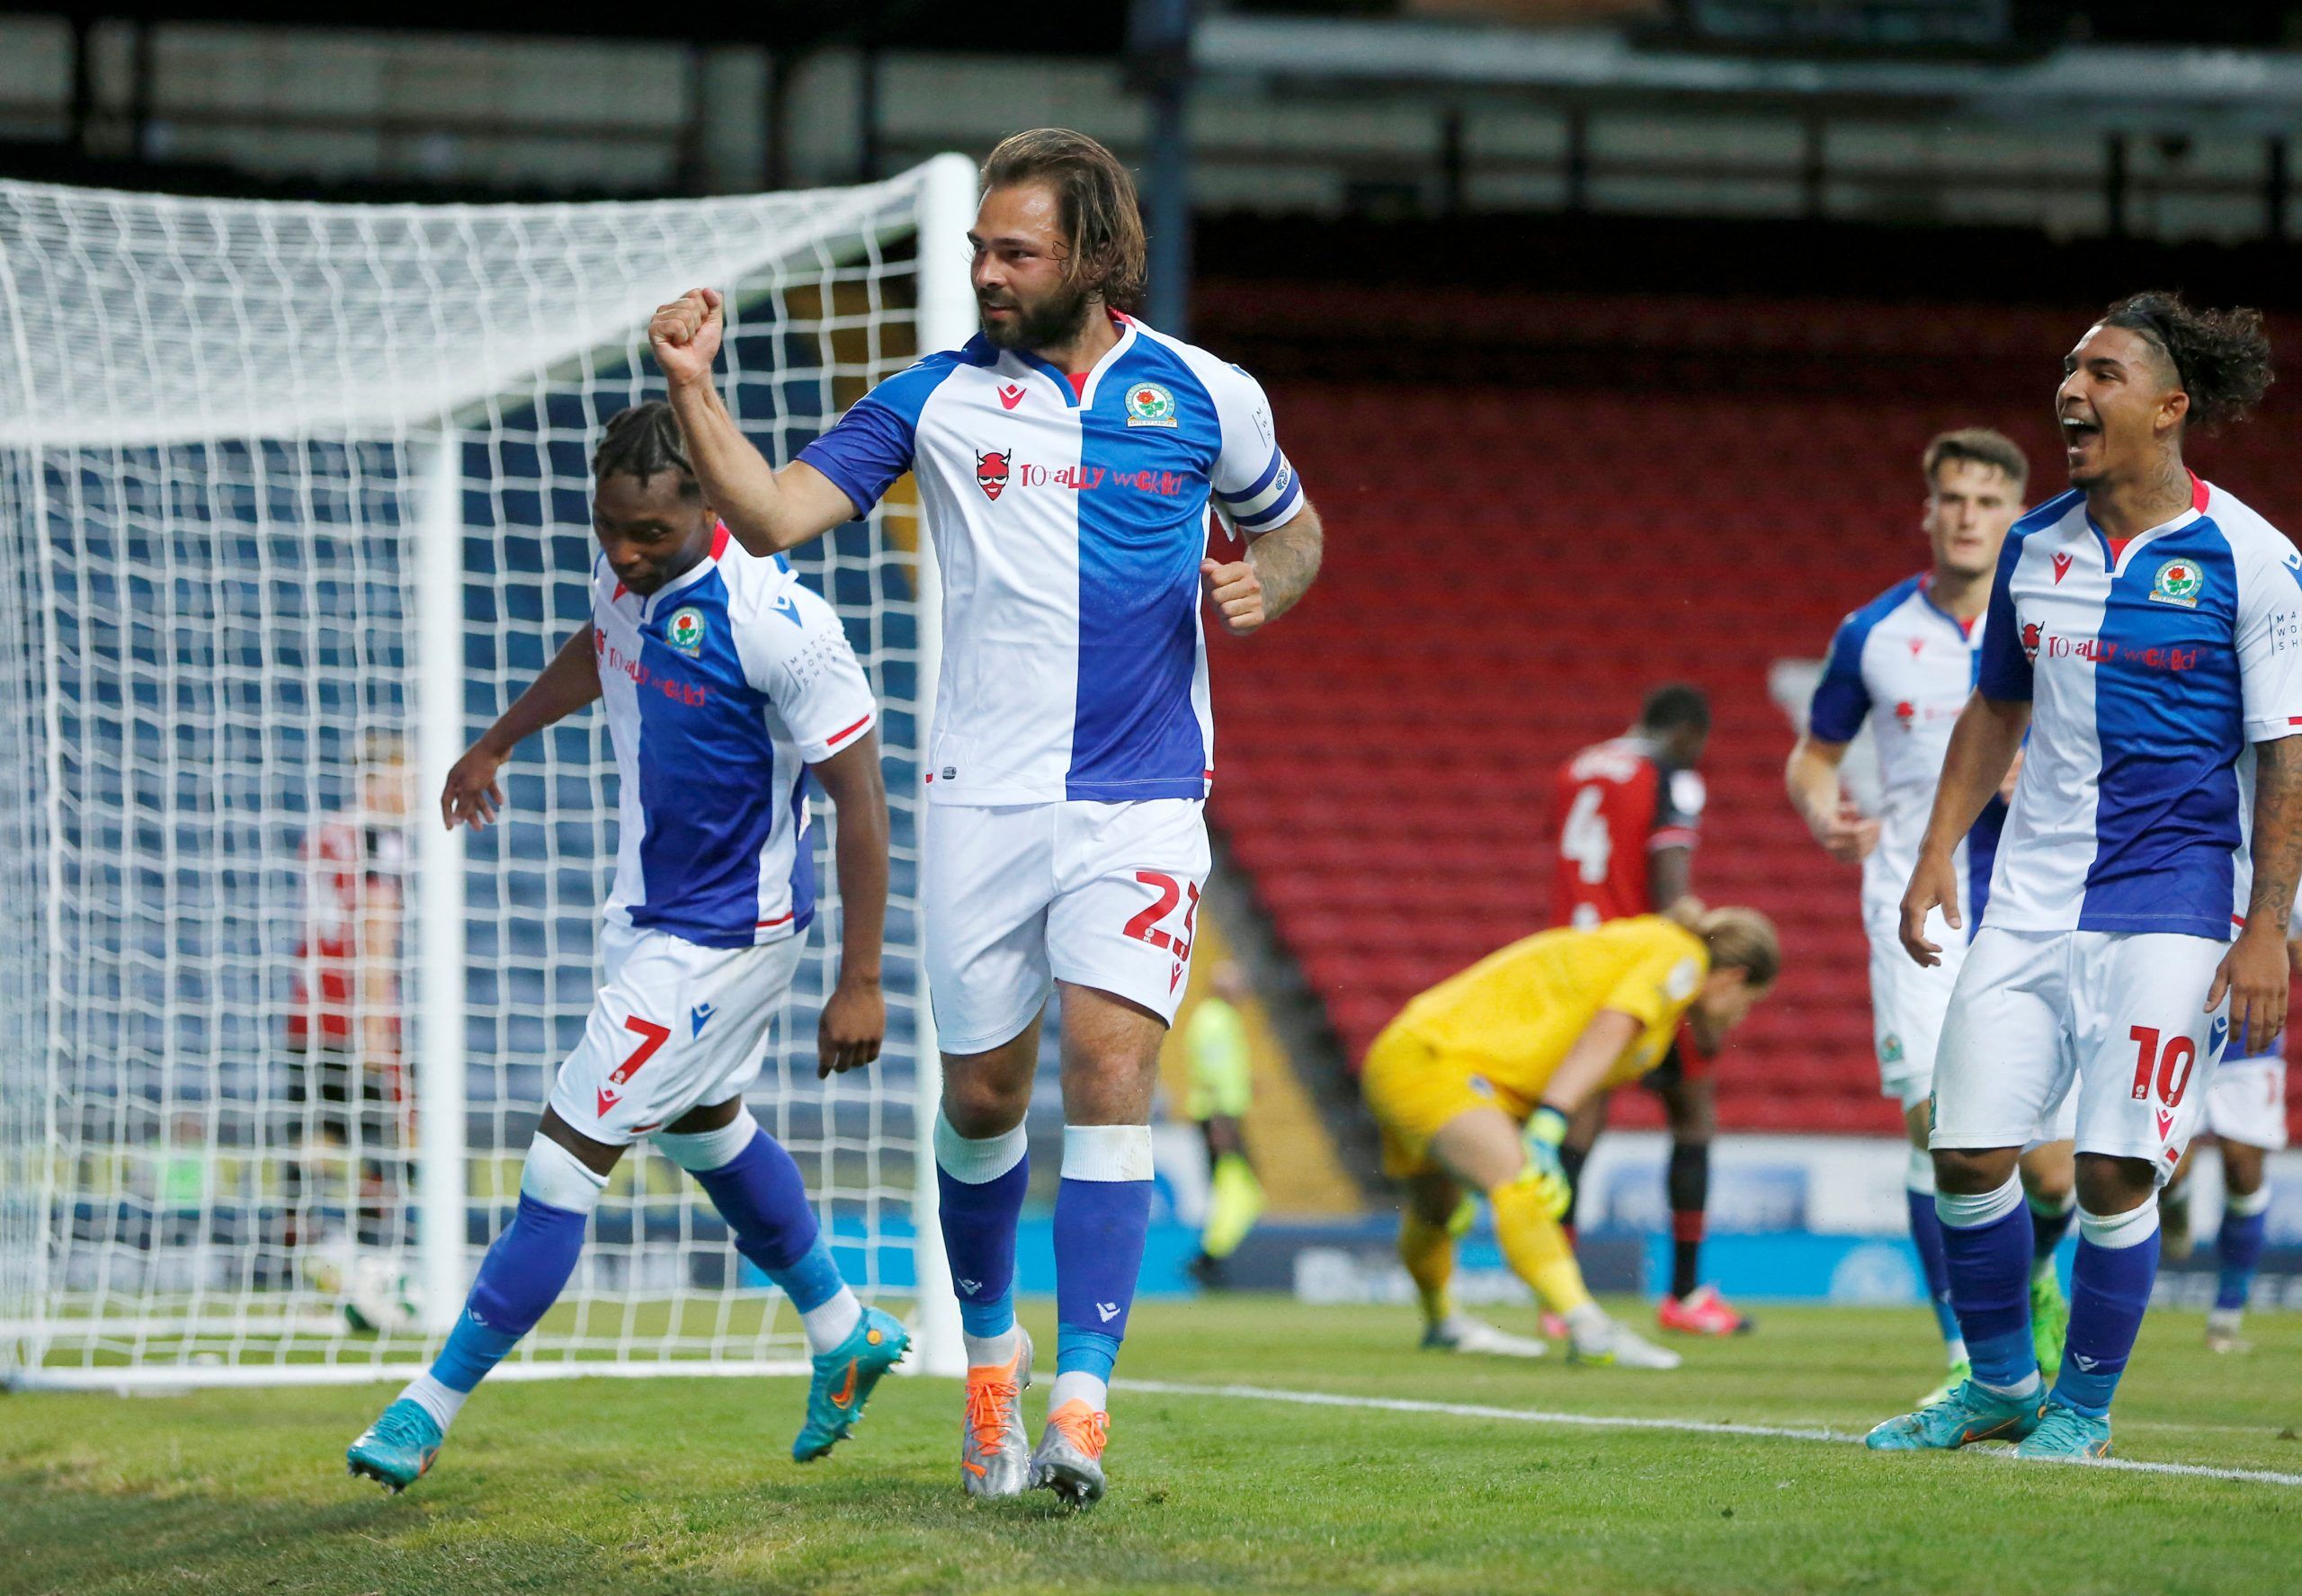 Soccer Football - Carabao Cup - Blackburn Rovers v Hartlepool United - Ewood Park, Blackburn, Britain - August 10, 2022 Blackburn Rovers' Bradley Dack celebrates scoring their second goal Action Images/Ed Sykes  EDITORIAL USE ONLY. No use with unauthorized audio, video, data, fixture lists, club/league logos or 